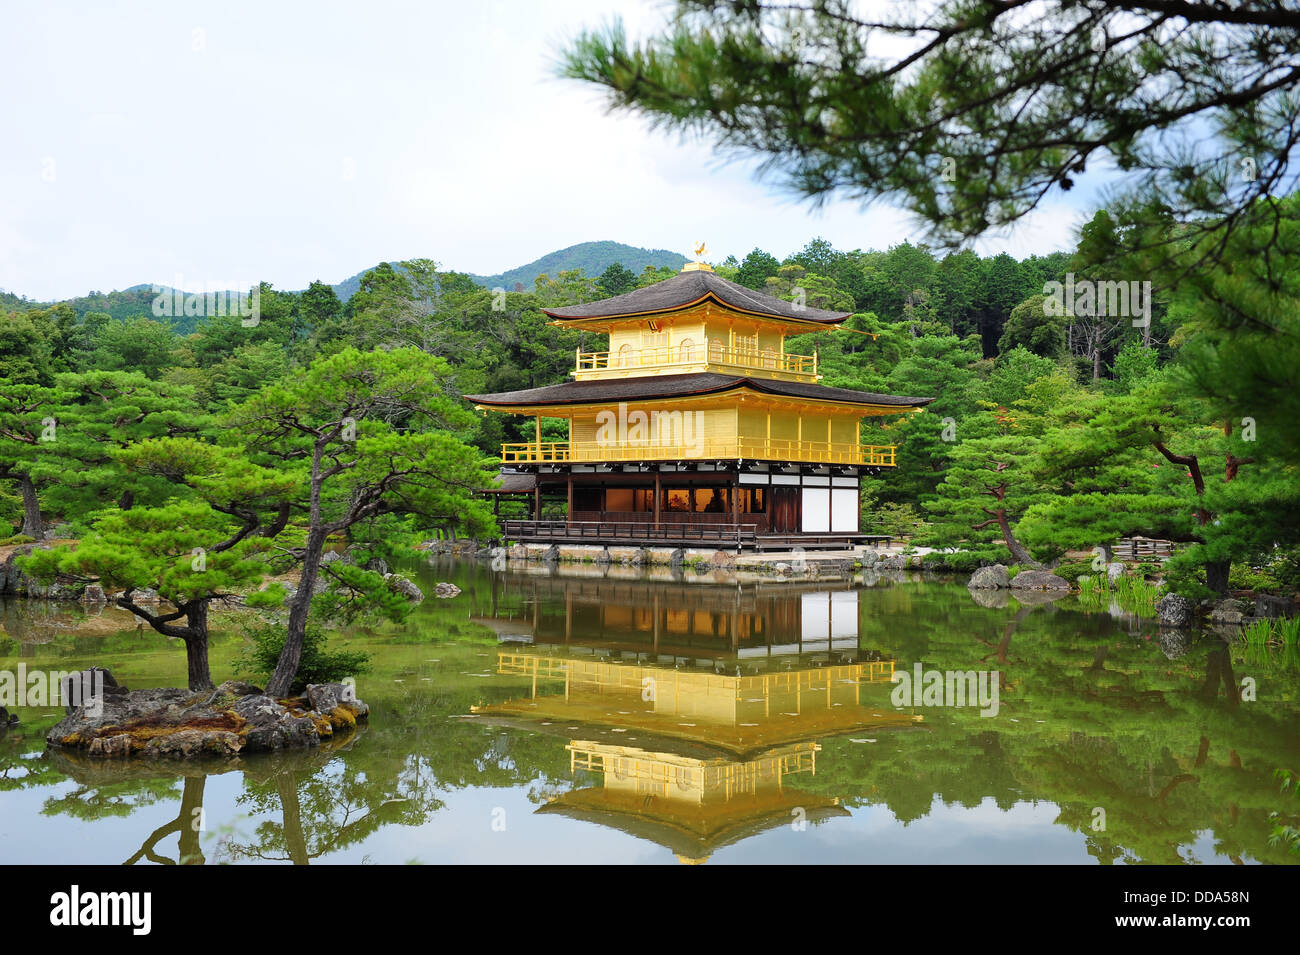 Temple of the Golden Pavilion Stock Photo